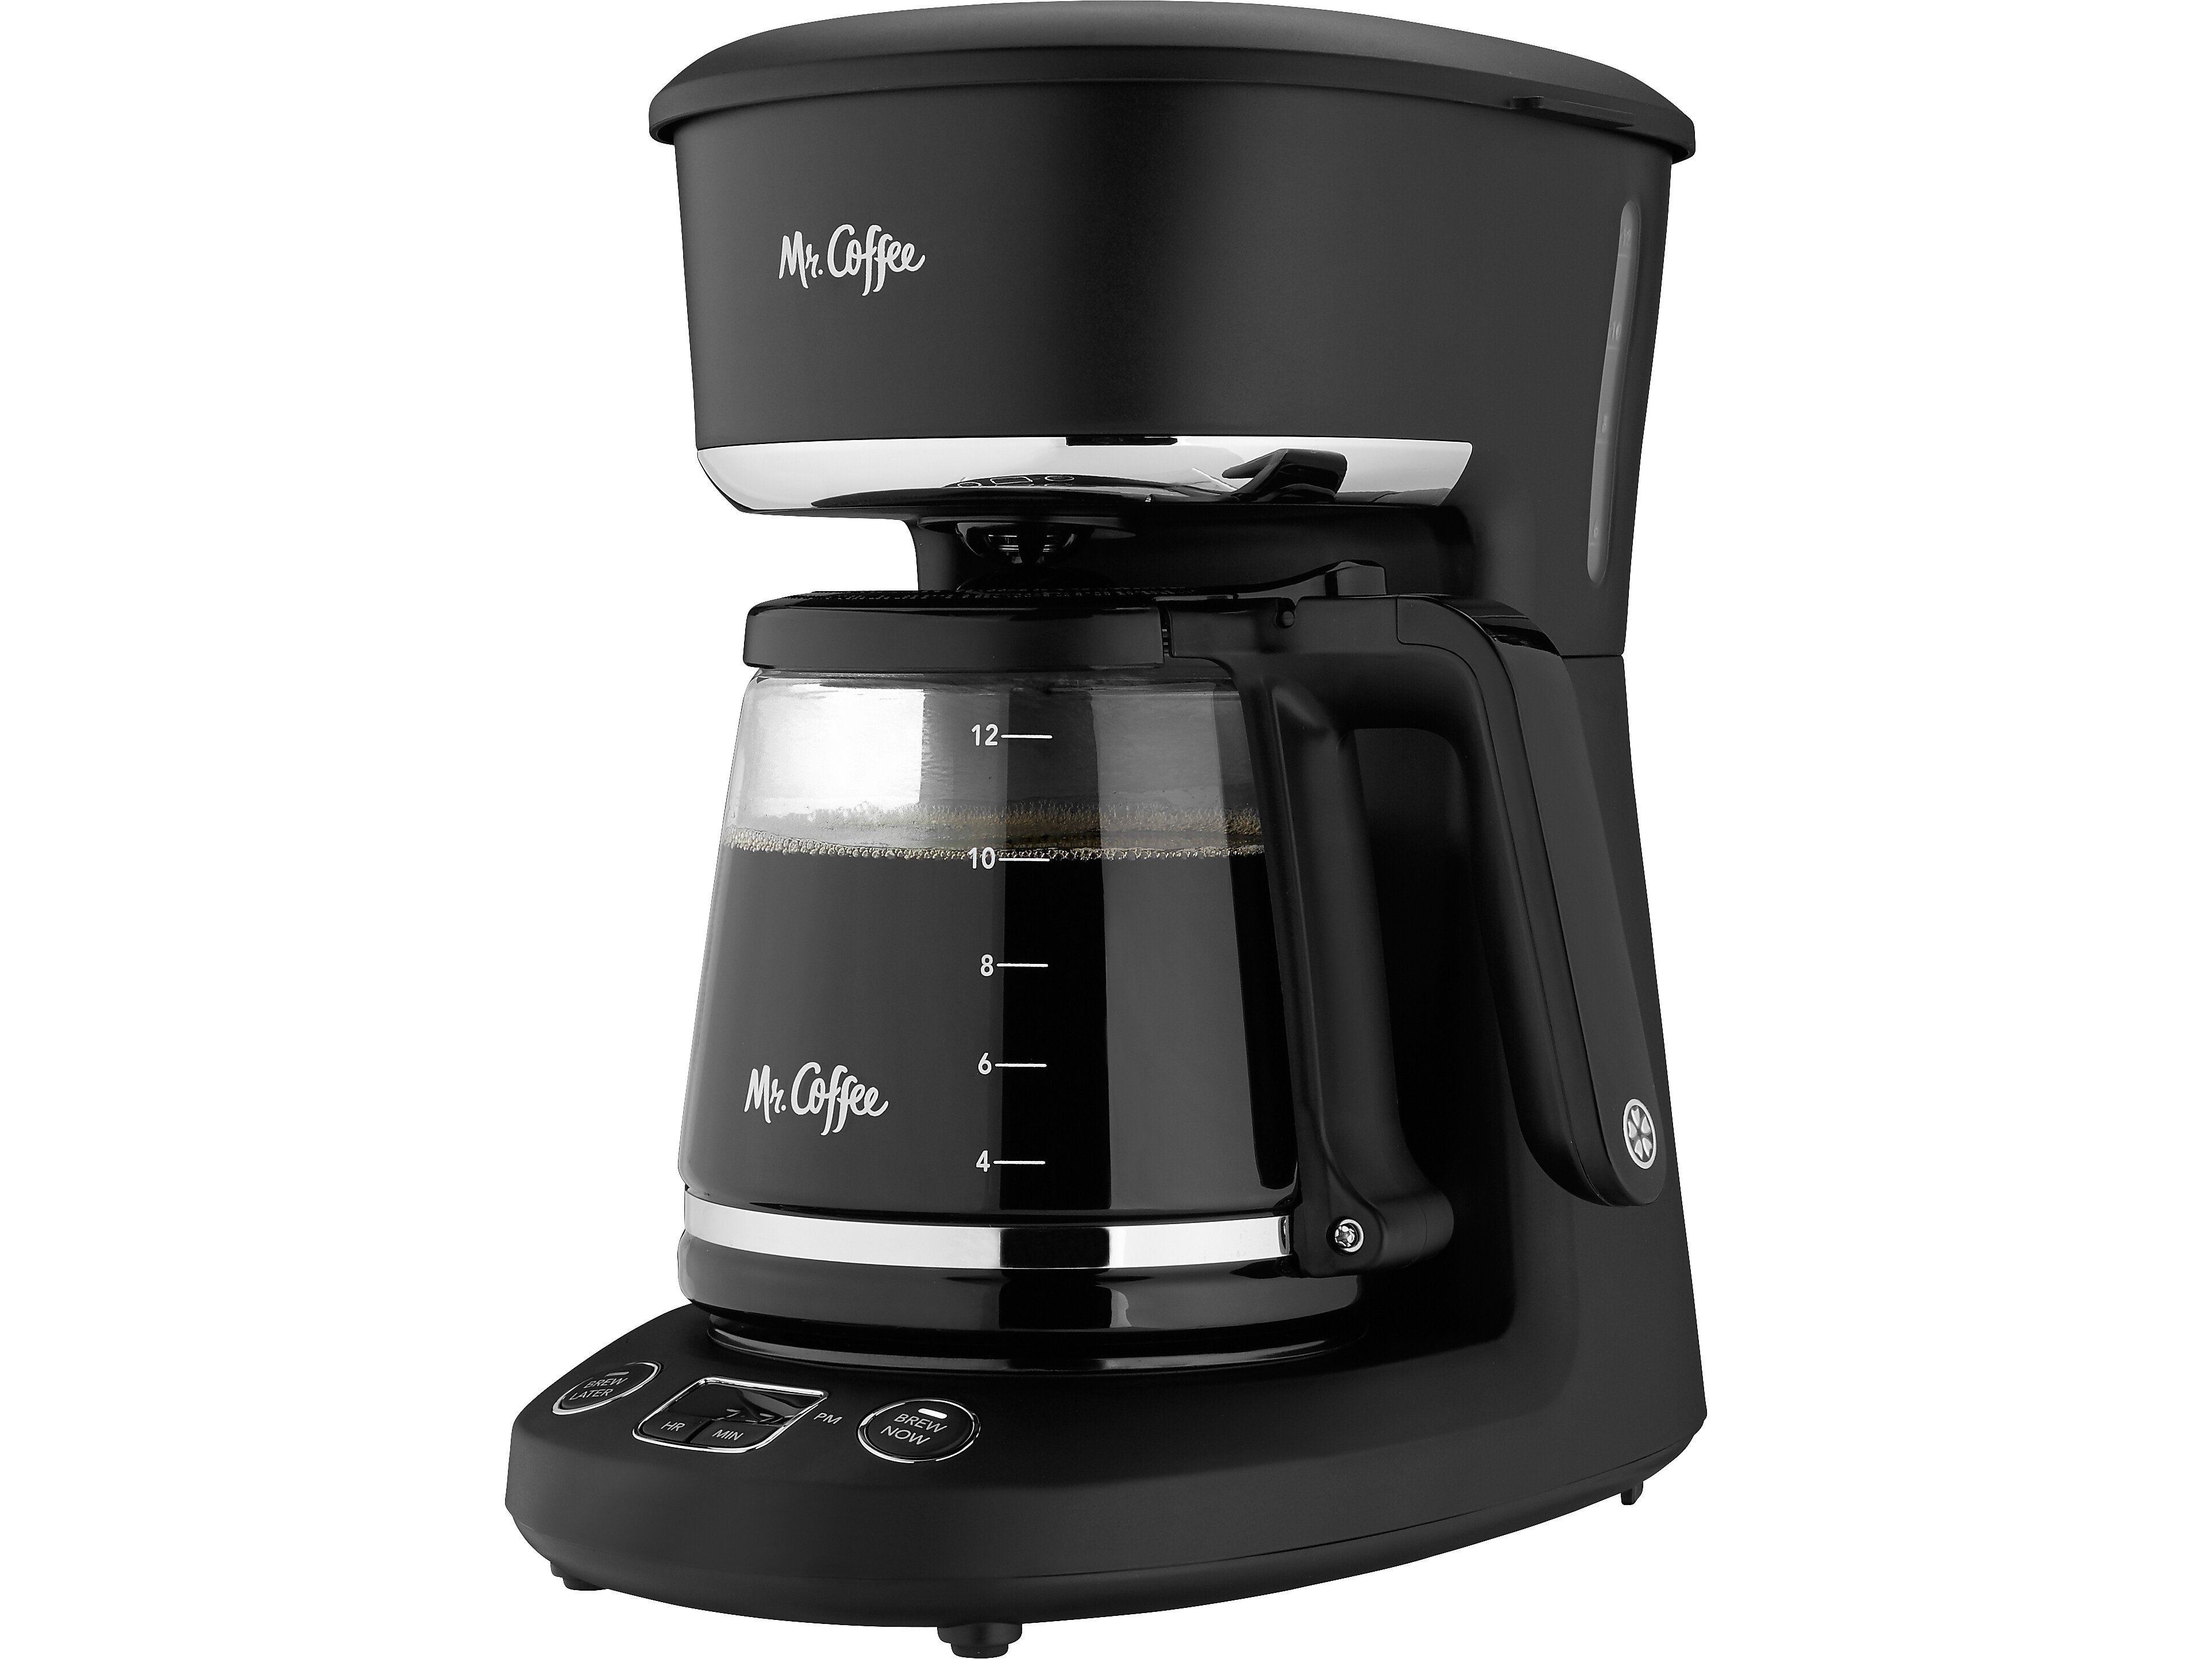 Mr. Coffee 12-Cup Programmable Coffeemaker, Brew Now or Later, Black - image 1 of 6